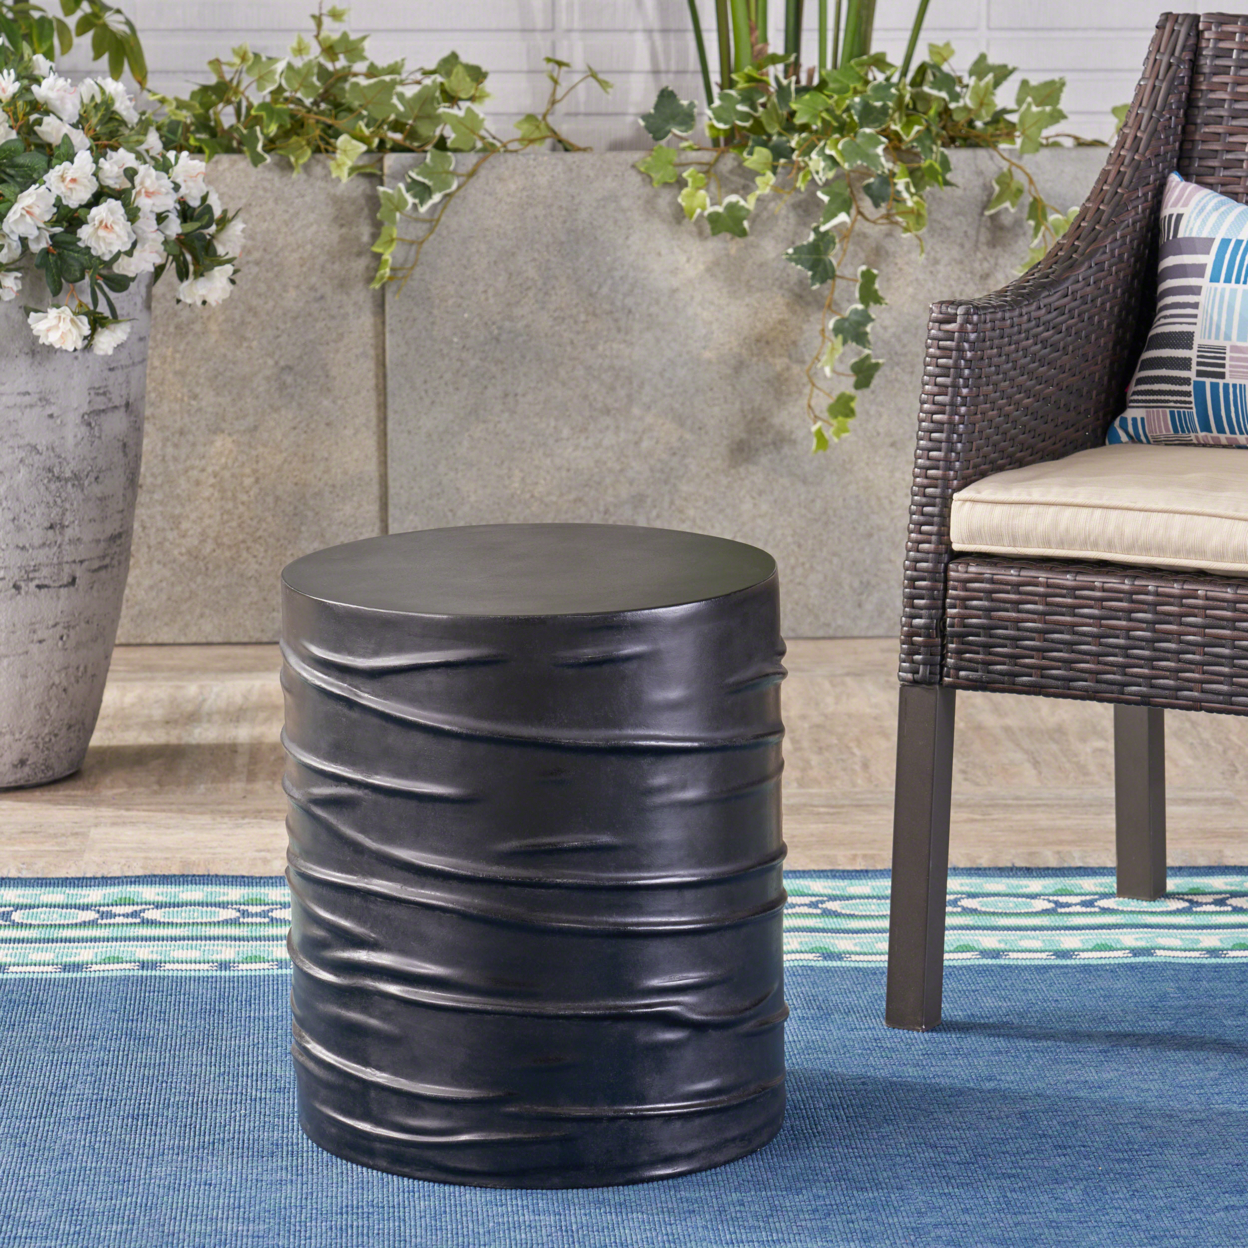 Aubree Outdoor 16-inch Light-Weight Concrete Side Table - Black